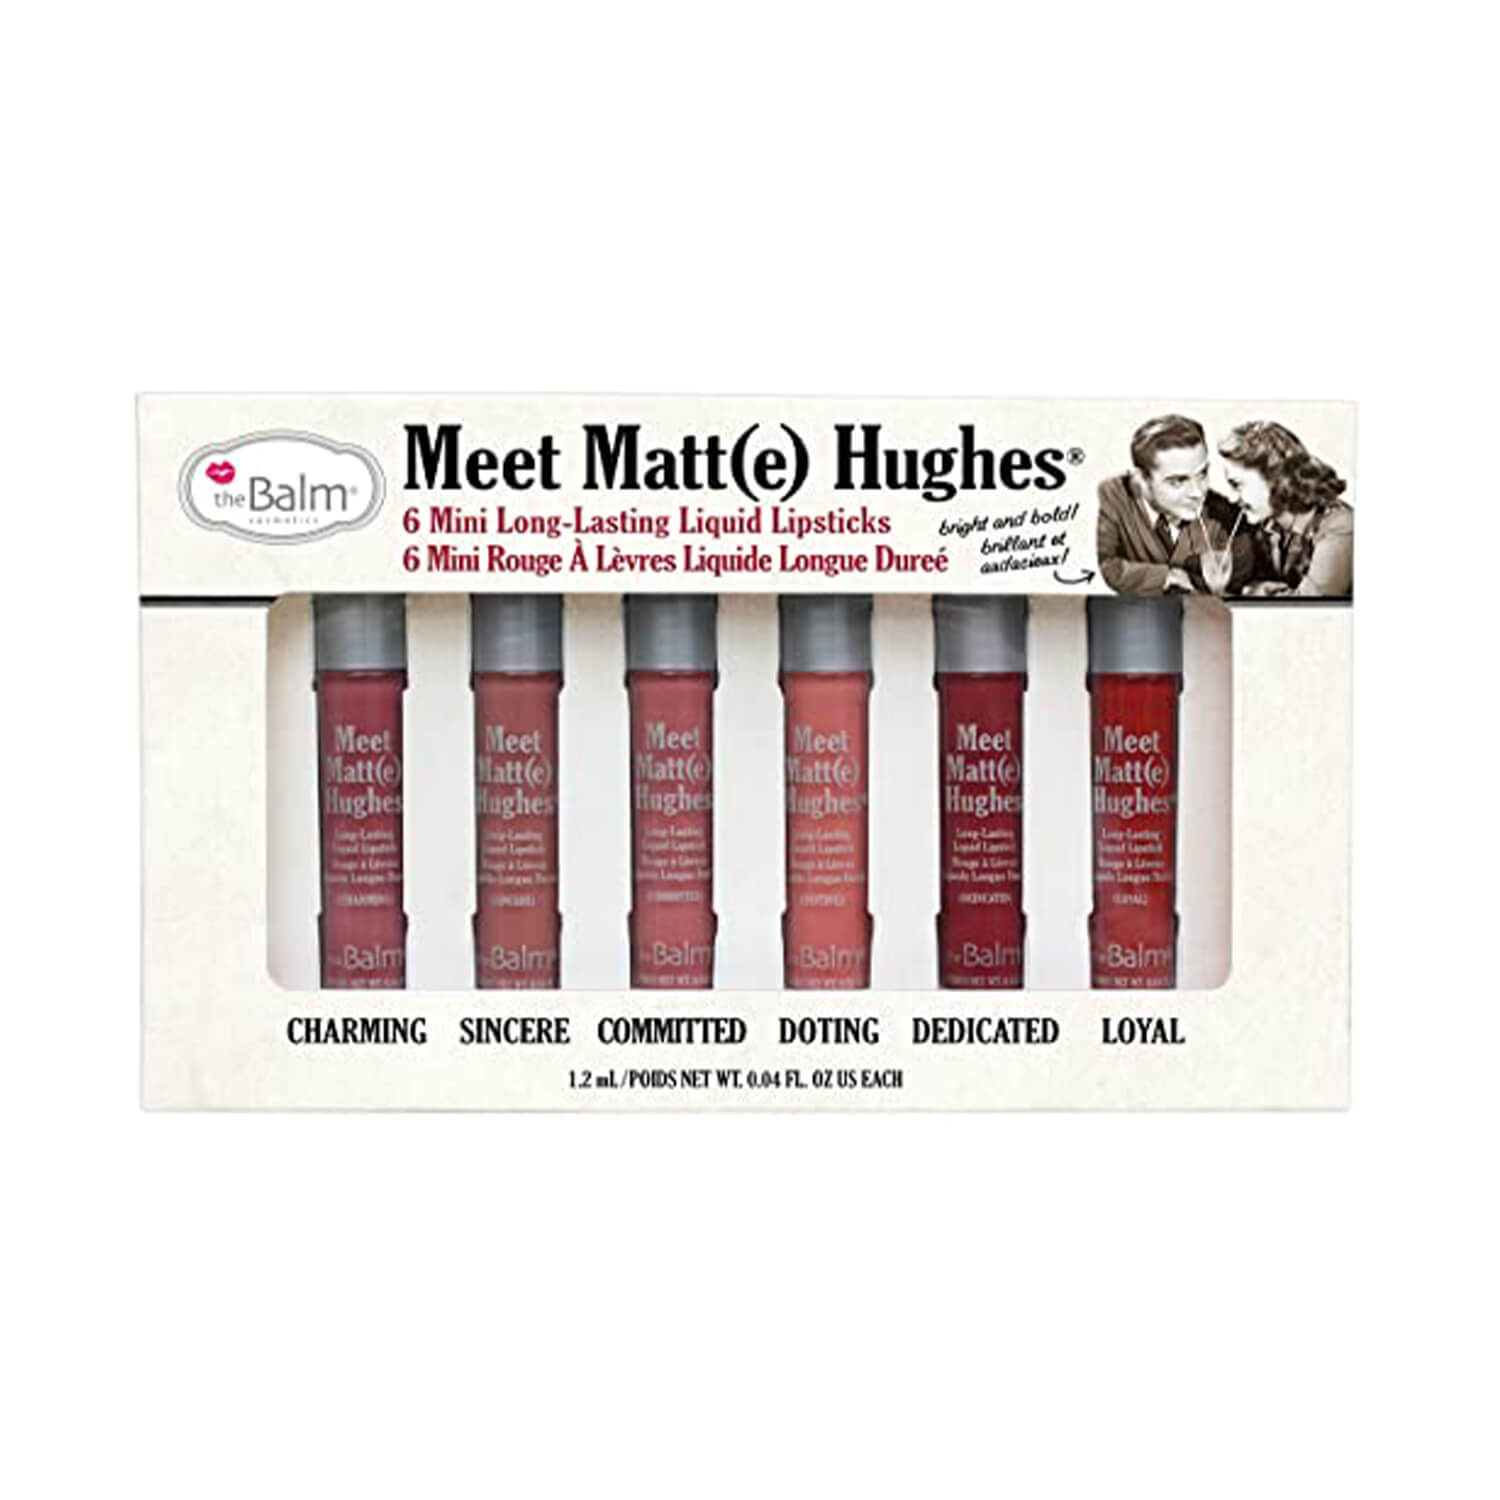 buy the balm meet matte hughes available at heygirl.pk for delivery in Pakistan